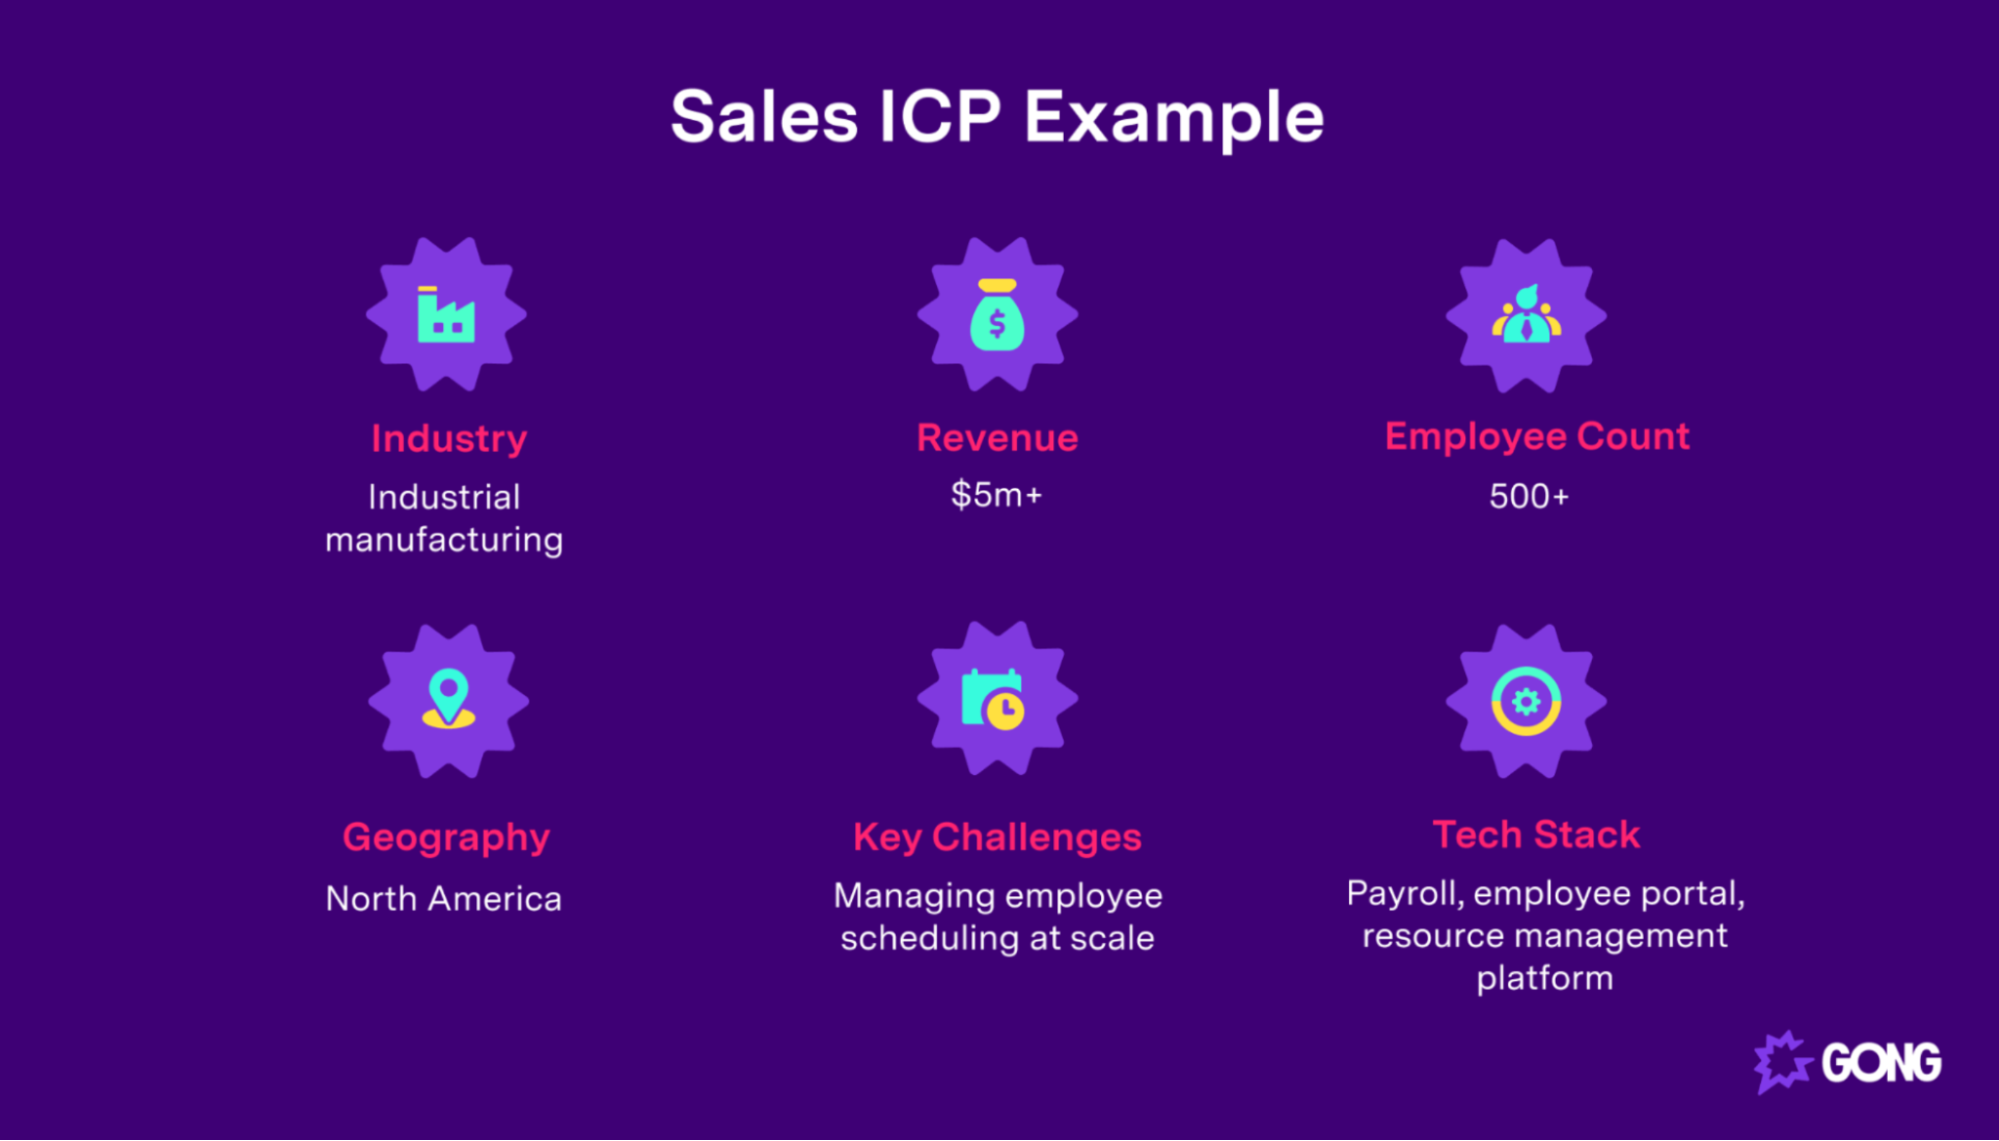 Example of a sales ICP